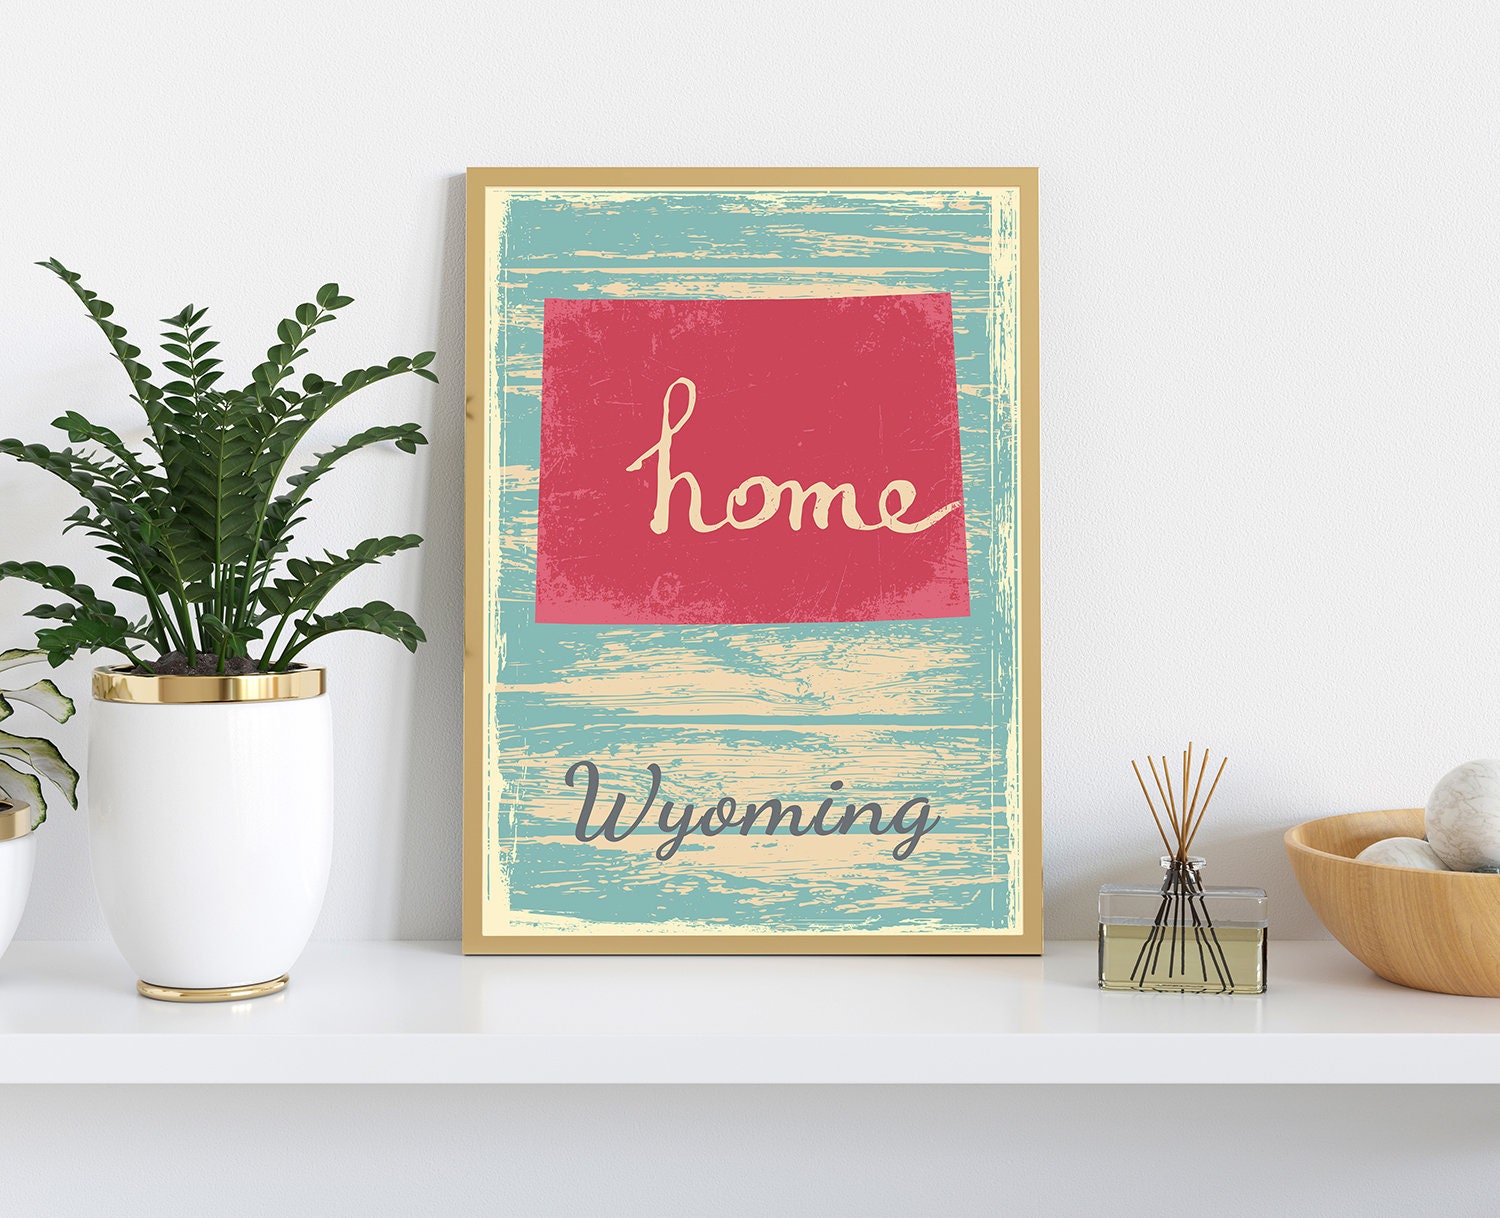 Retro Style Travel Poster, Vintage State Travel Poster Printing - Wall Art Print for Home Office Decor - Wyoming State Poster, Home Wall Art